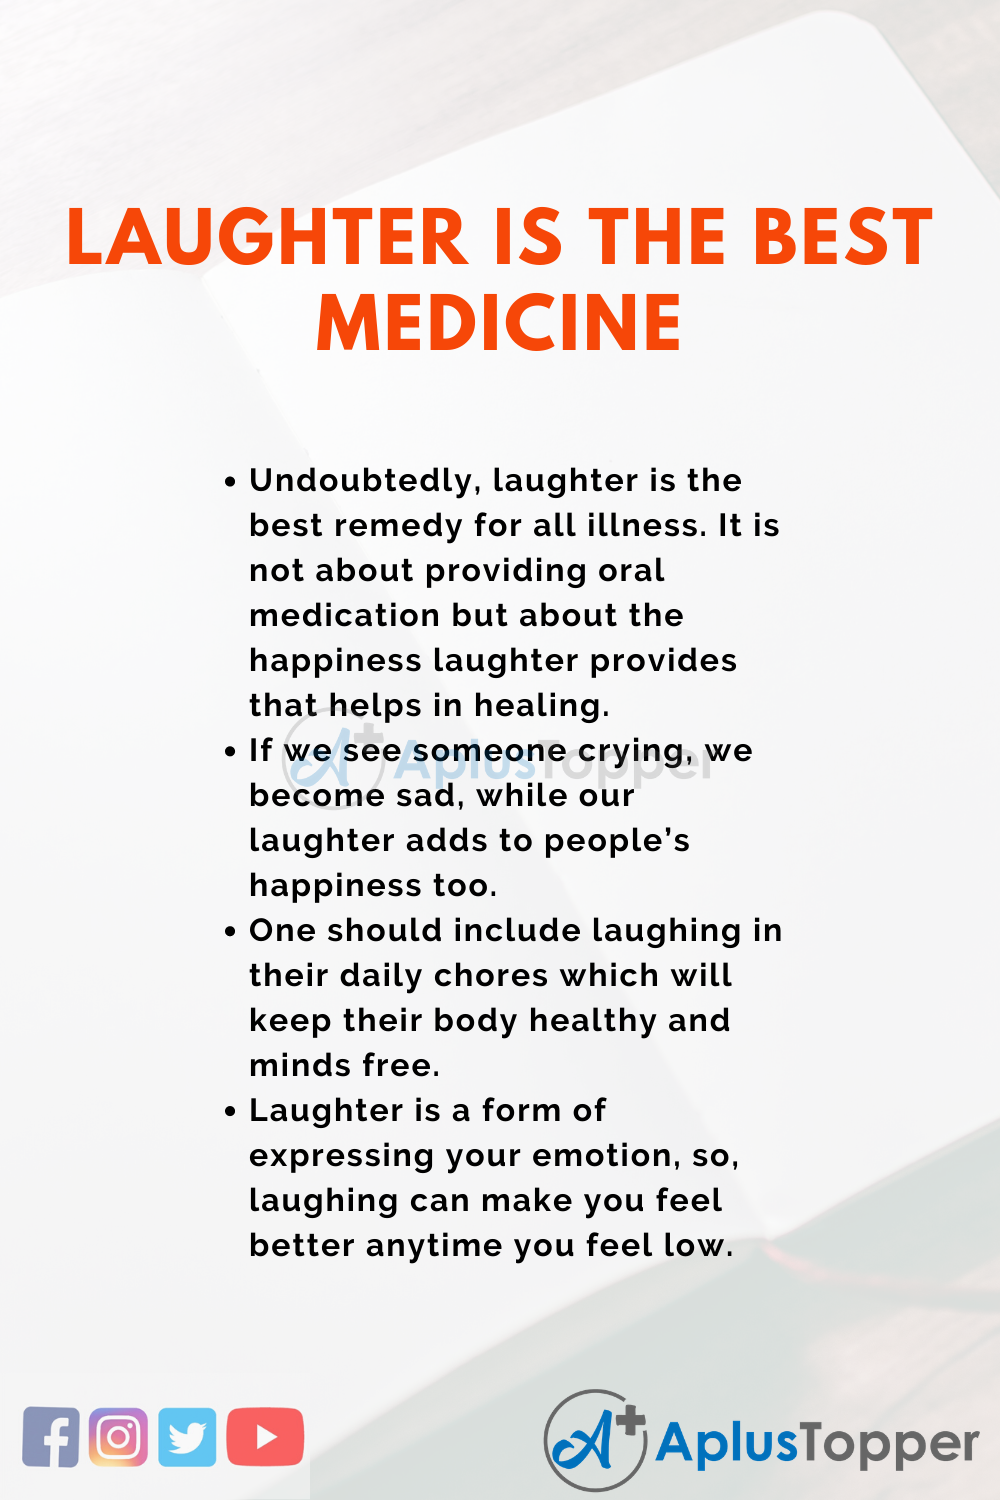 laughter is the best medicine essay 300 words in english